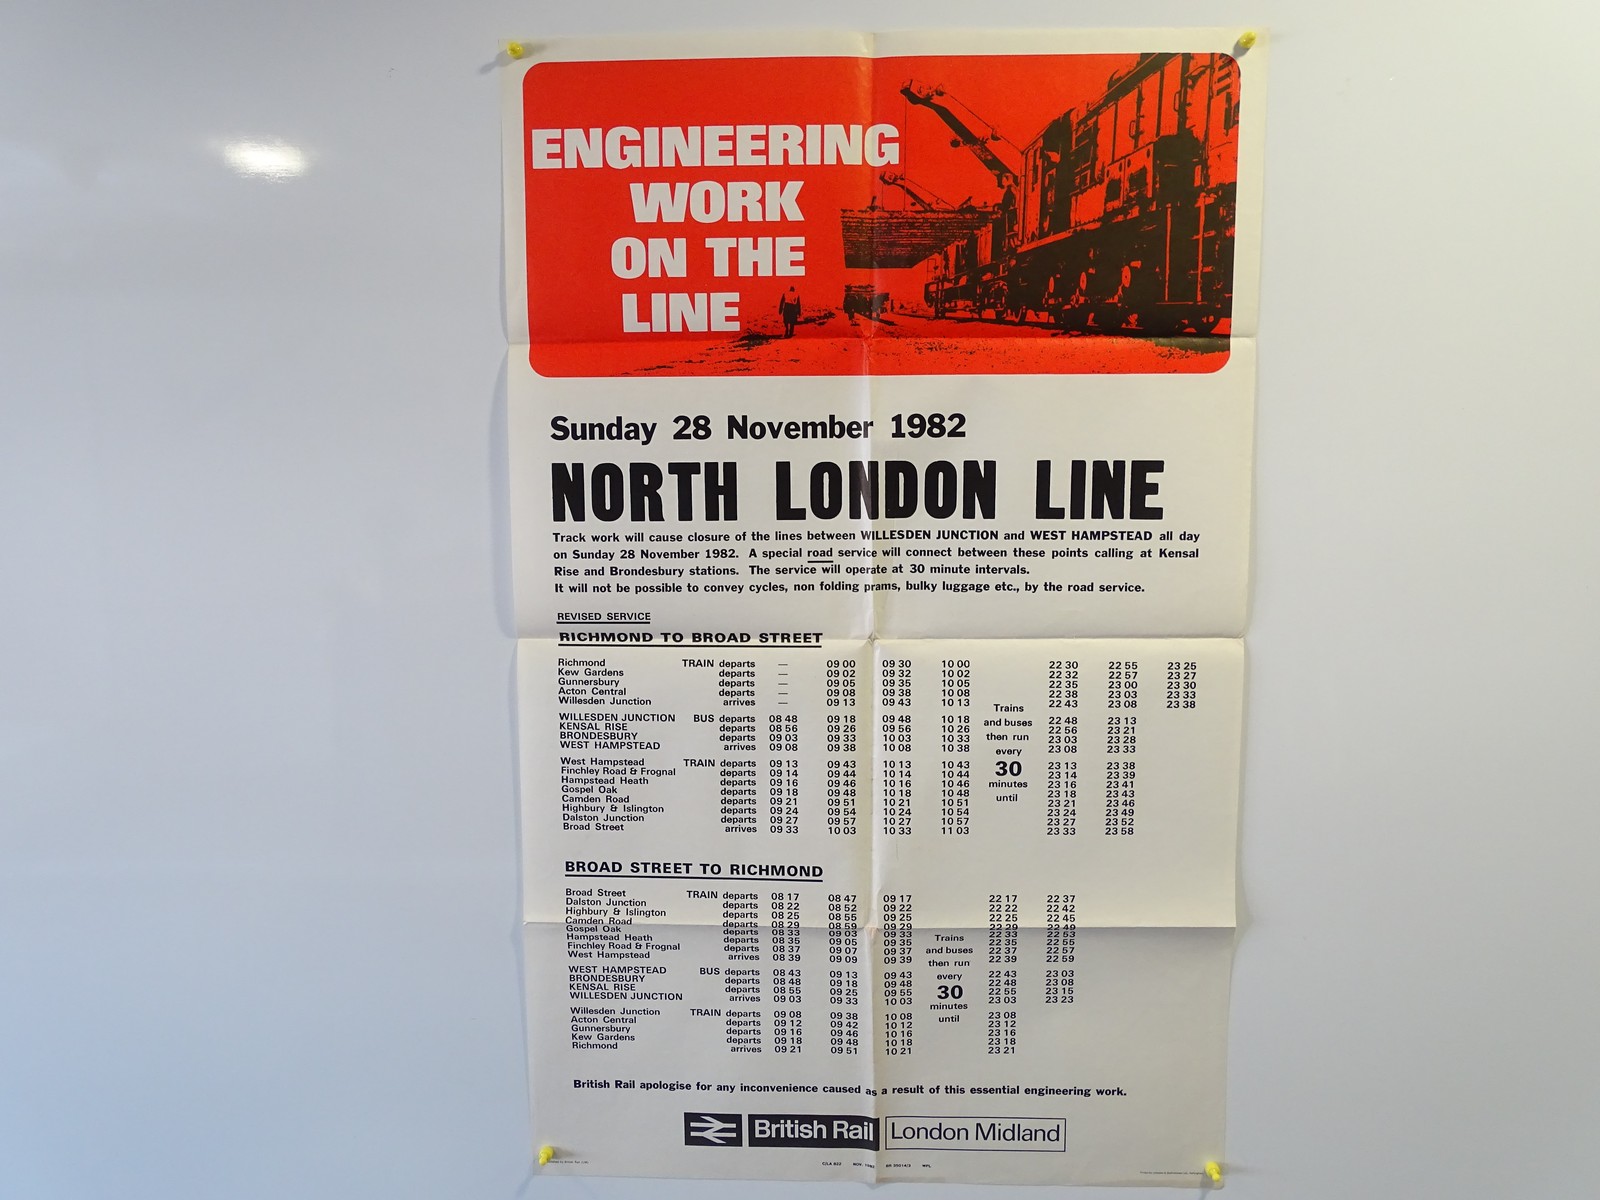 North London timetable for engineering works in 1982. The timetable shows trains from Broad Street to West Hampstead, bus to Willesden Junction and then train to Richmond.